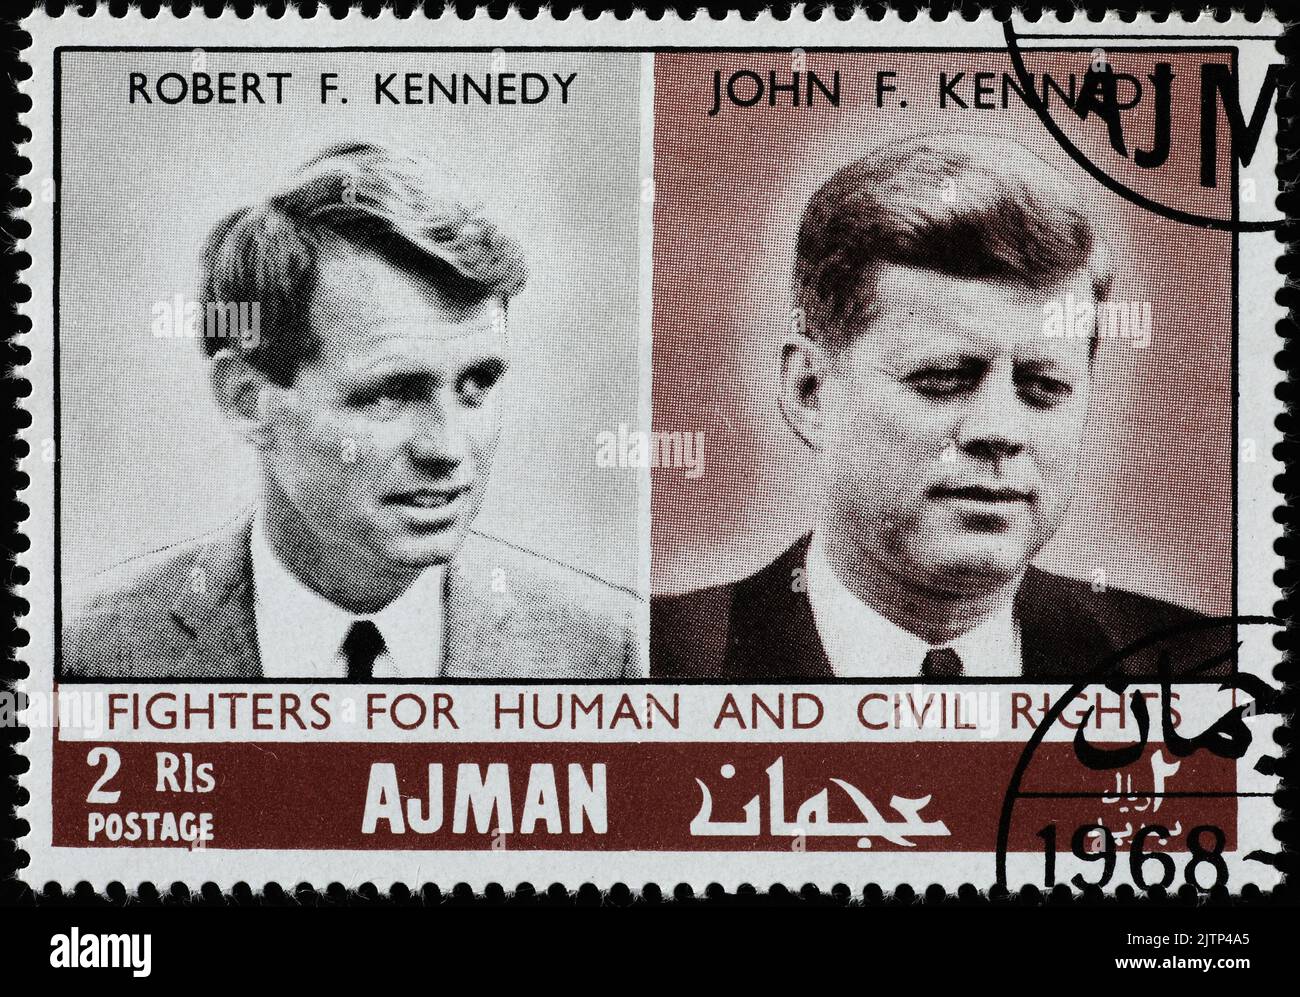 Robert and John Kennedy on postage stamp Stock Photo